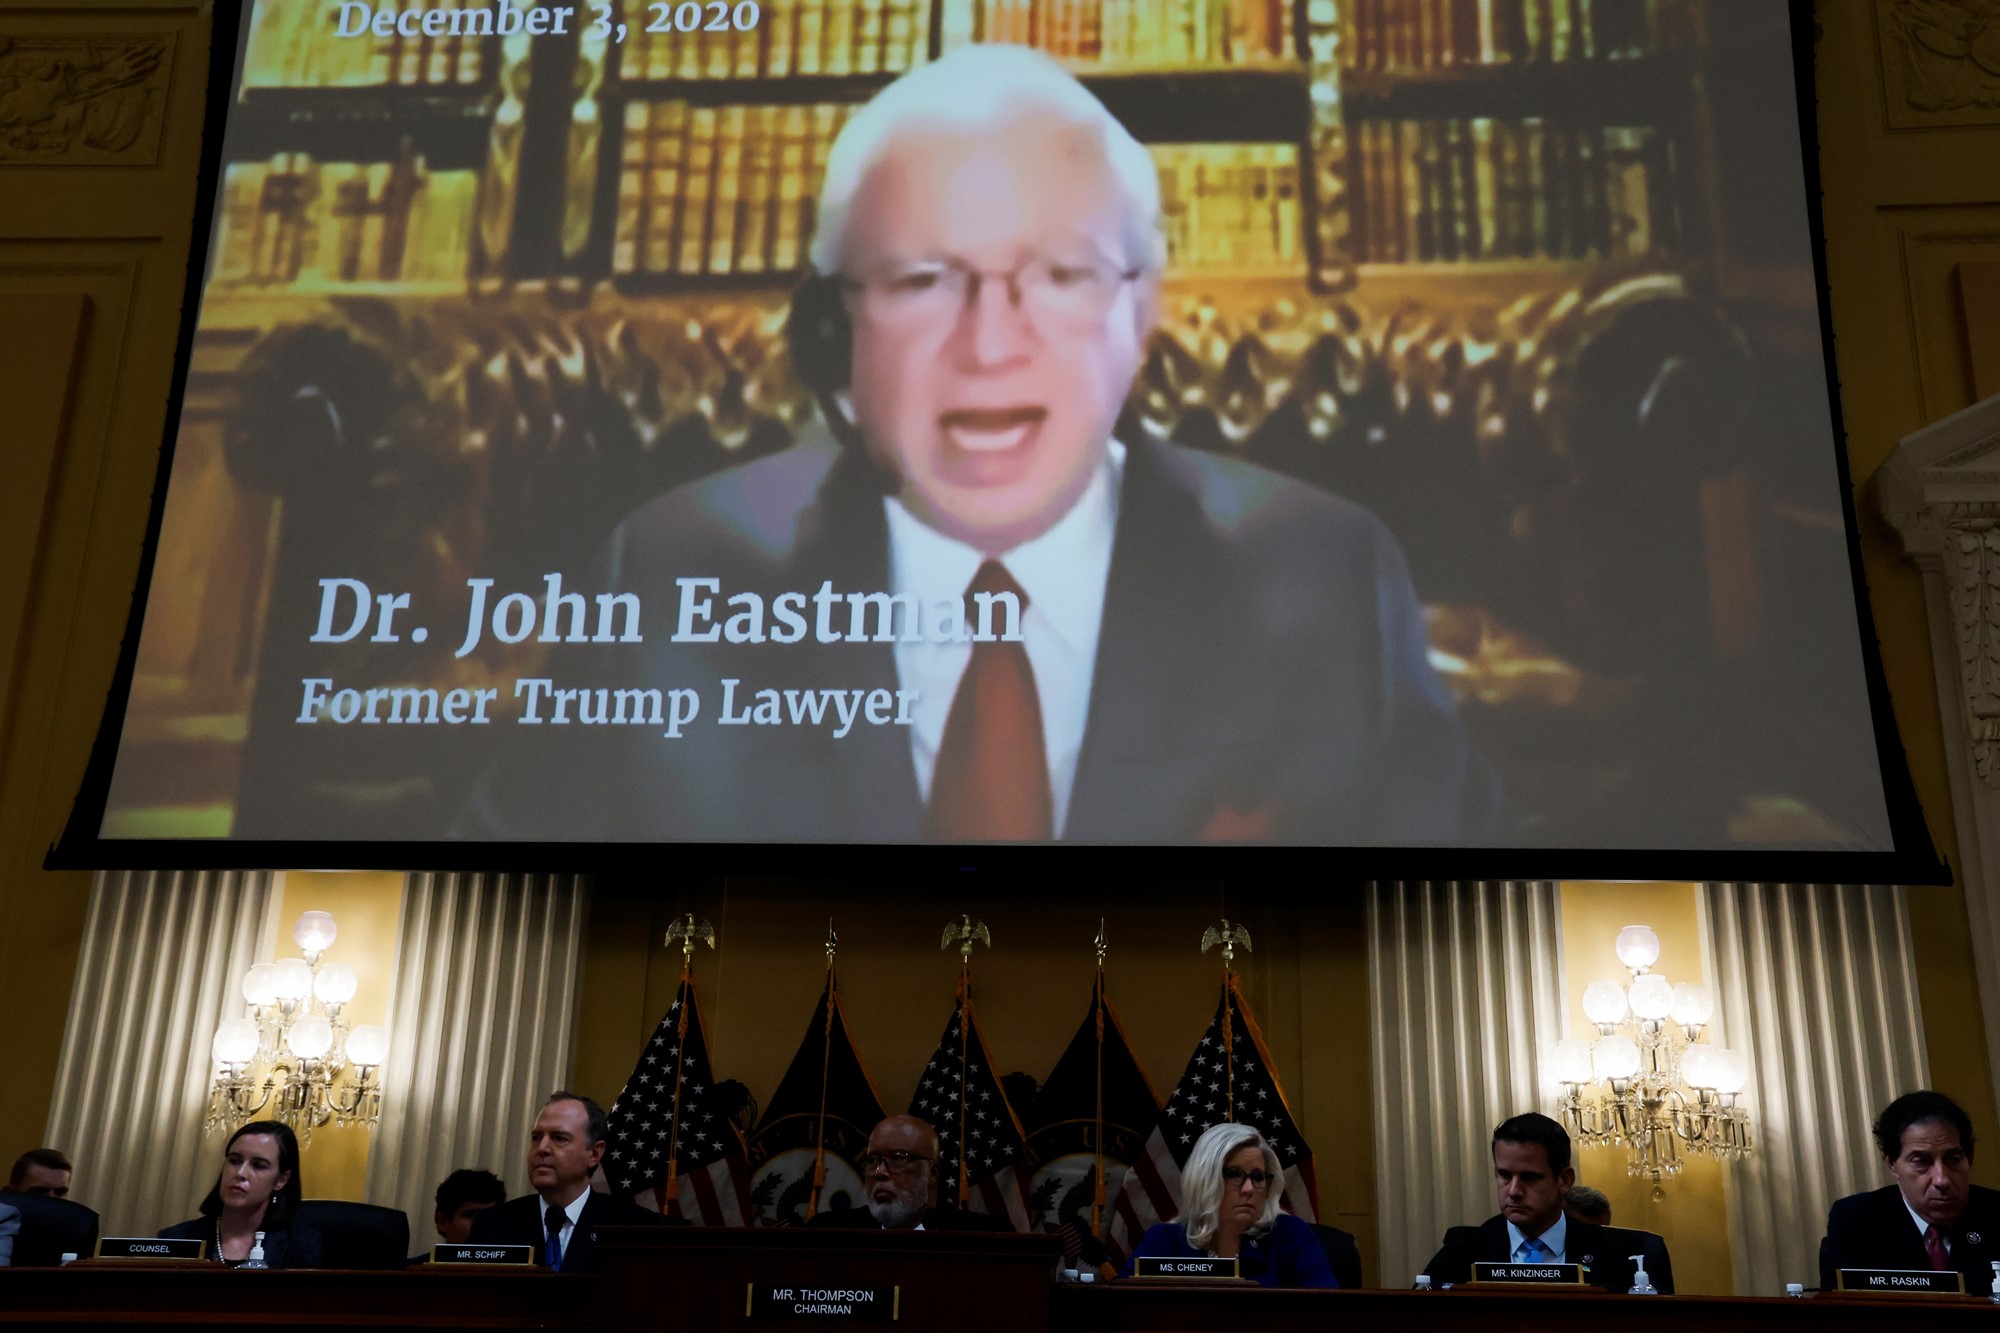 John Eastman, former attorney for former U.S. President Donald Trump, is seen speaking in a video displayed above during the fourth of eight planned public hearings